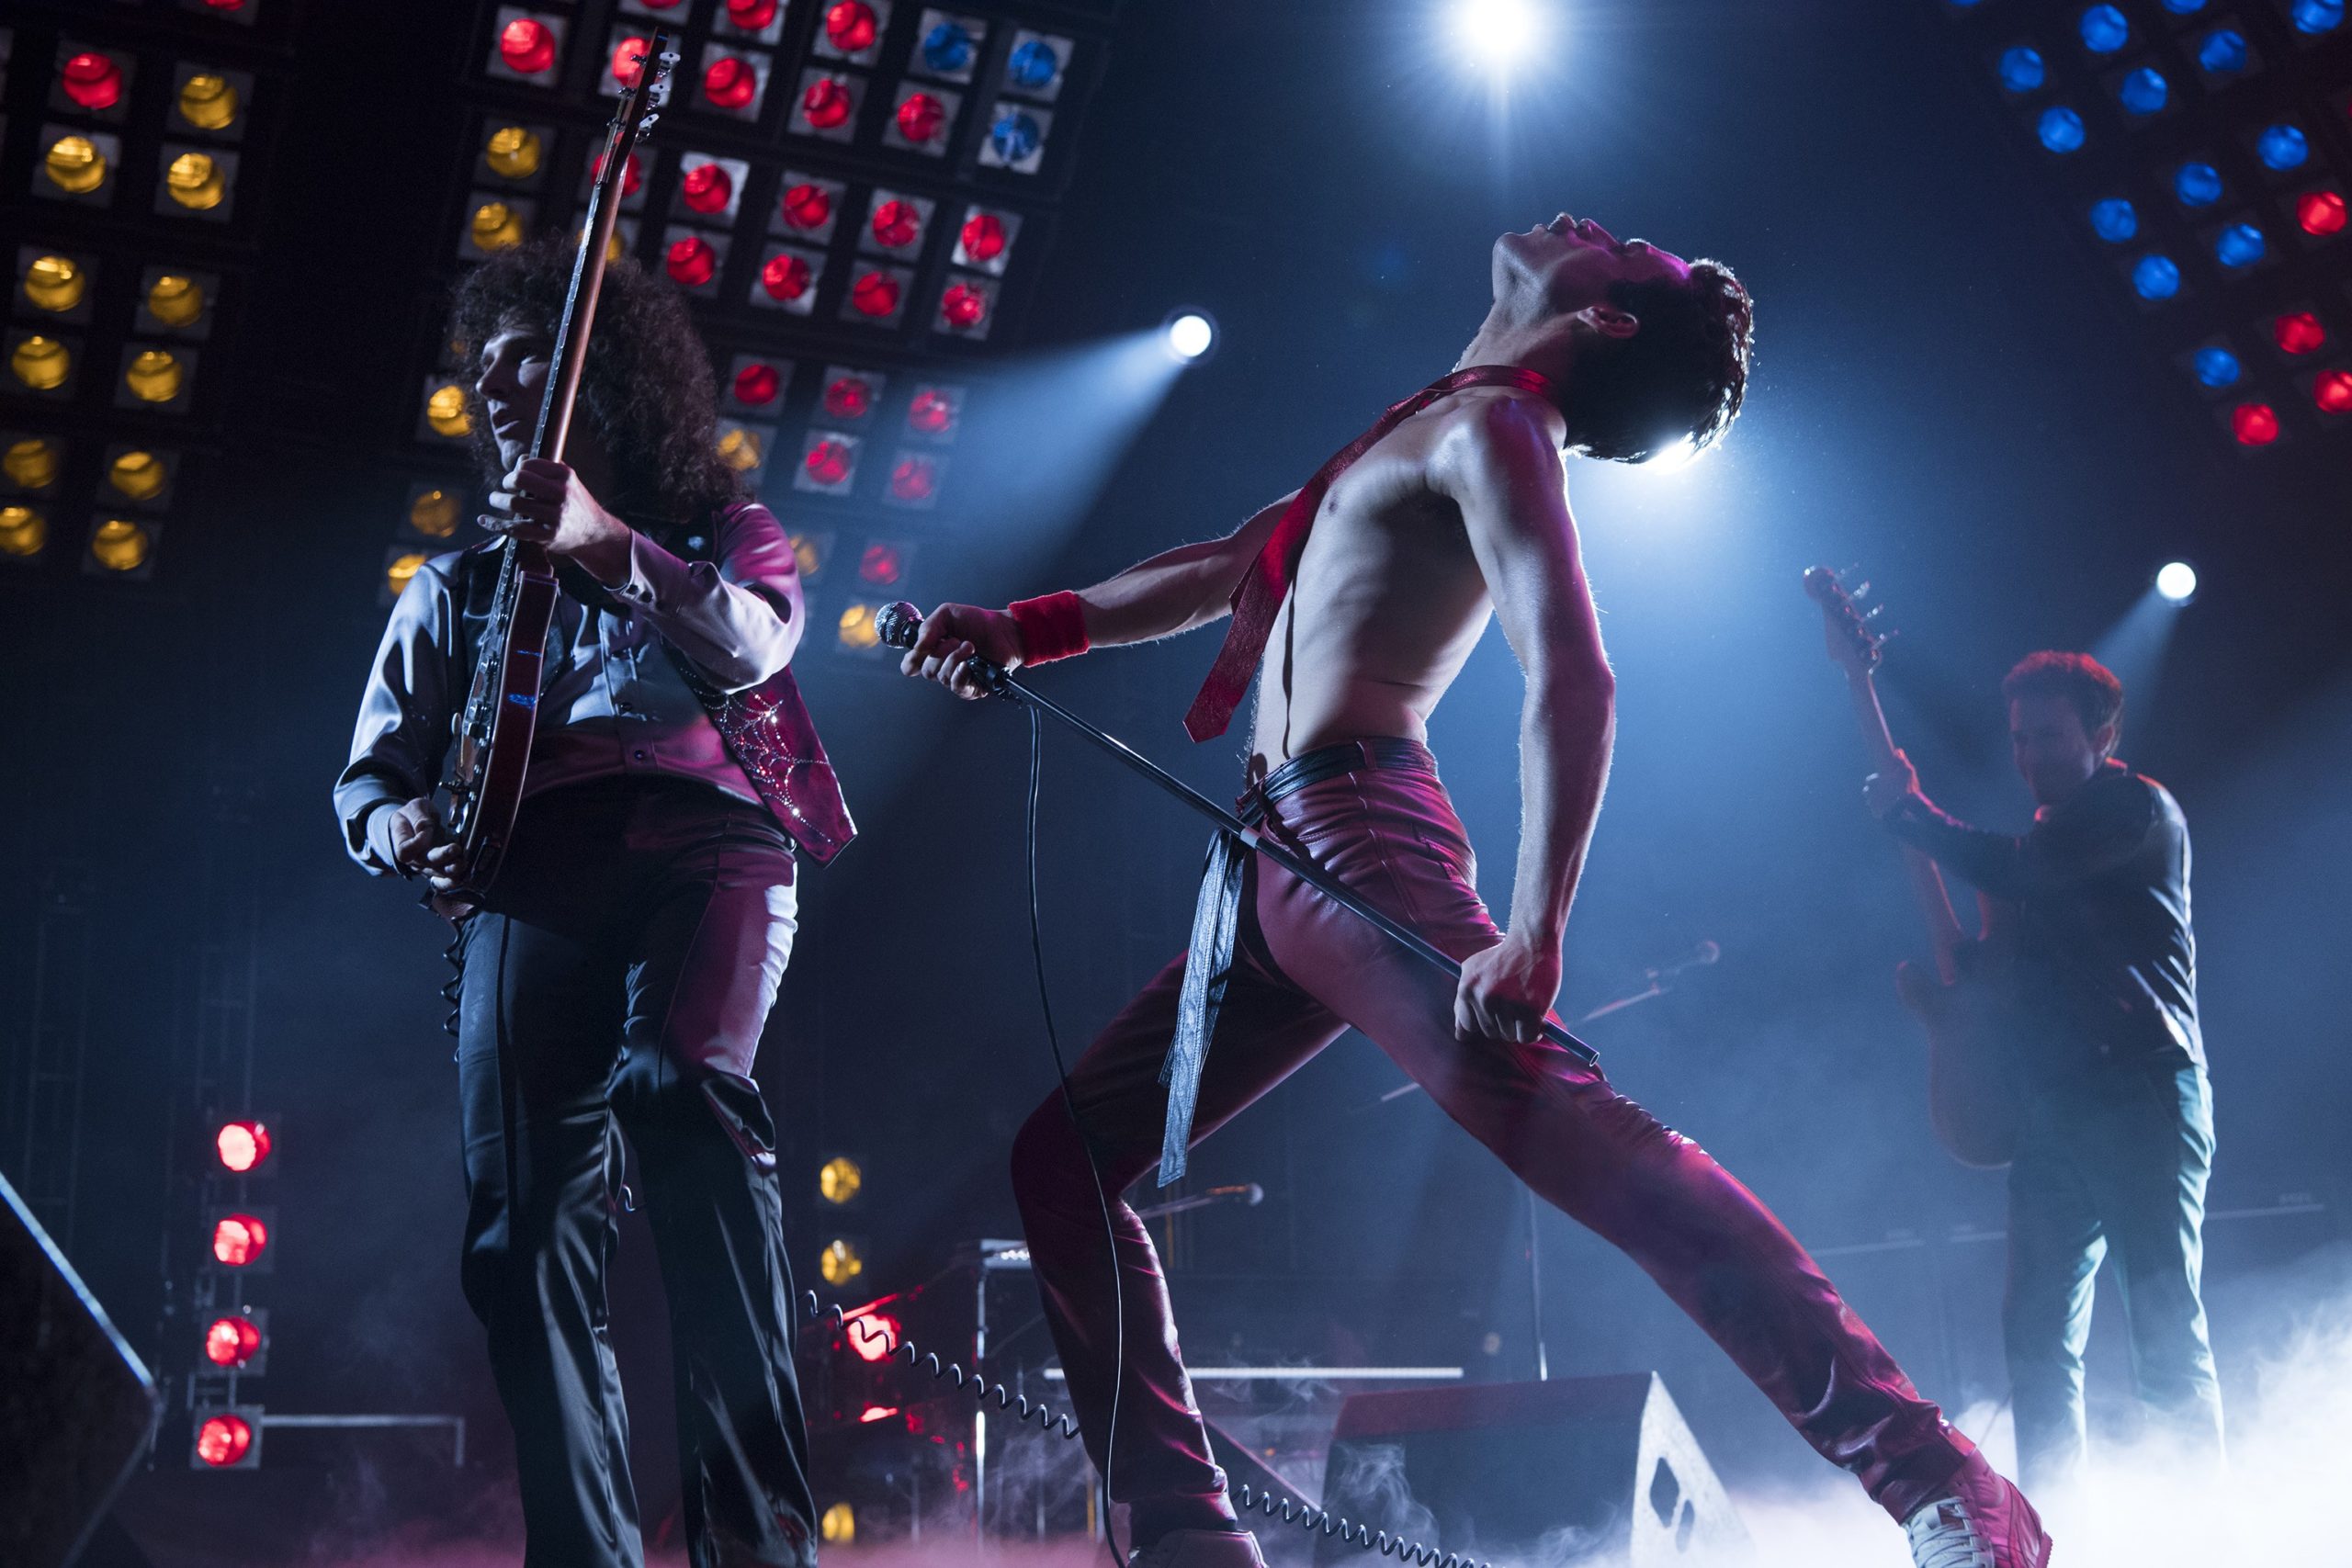 Is the musical biopic hollywood’s next superhero?